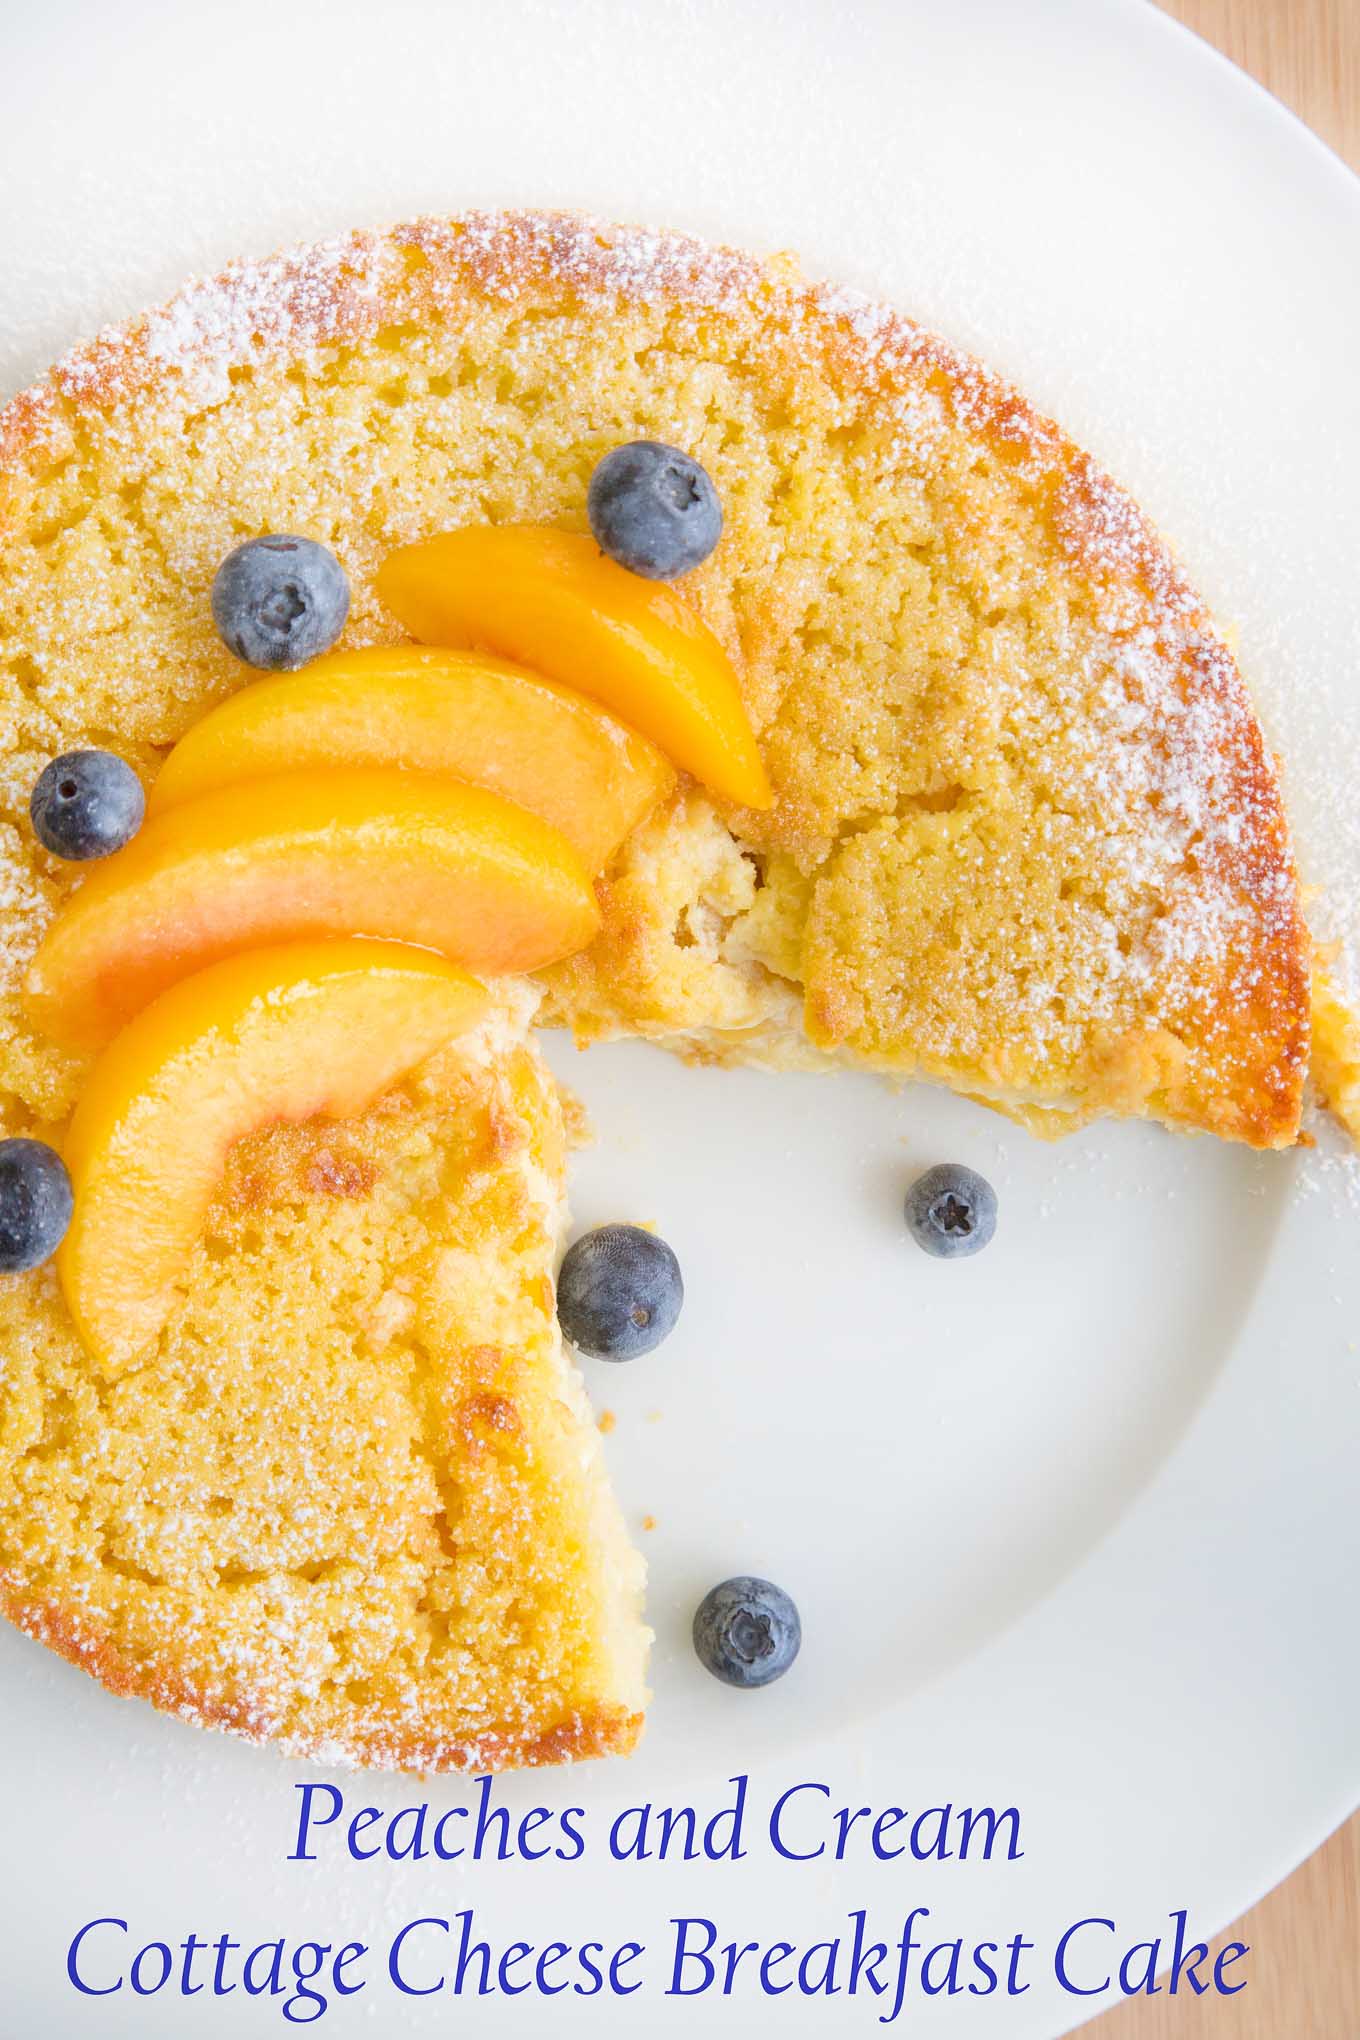 Peaches and Cream Cottage Cheese Breakfast Cake - Chef Dennis